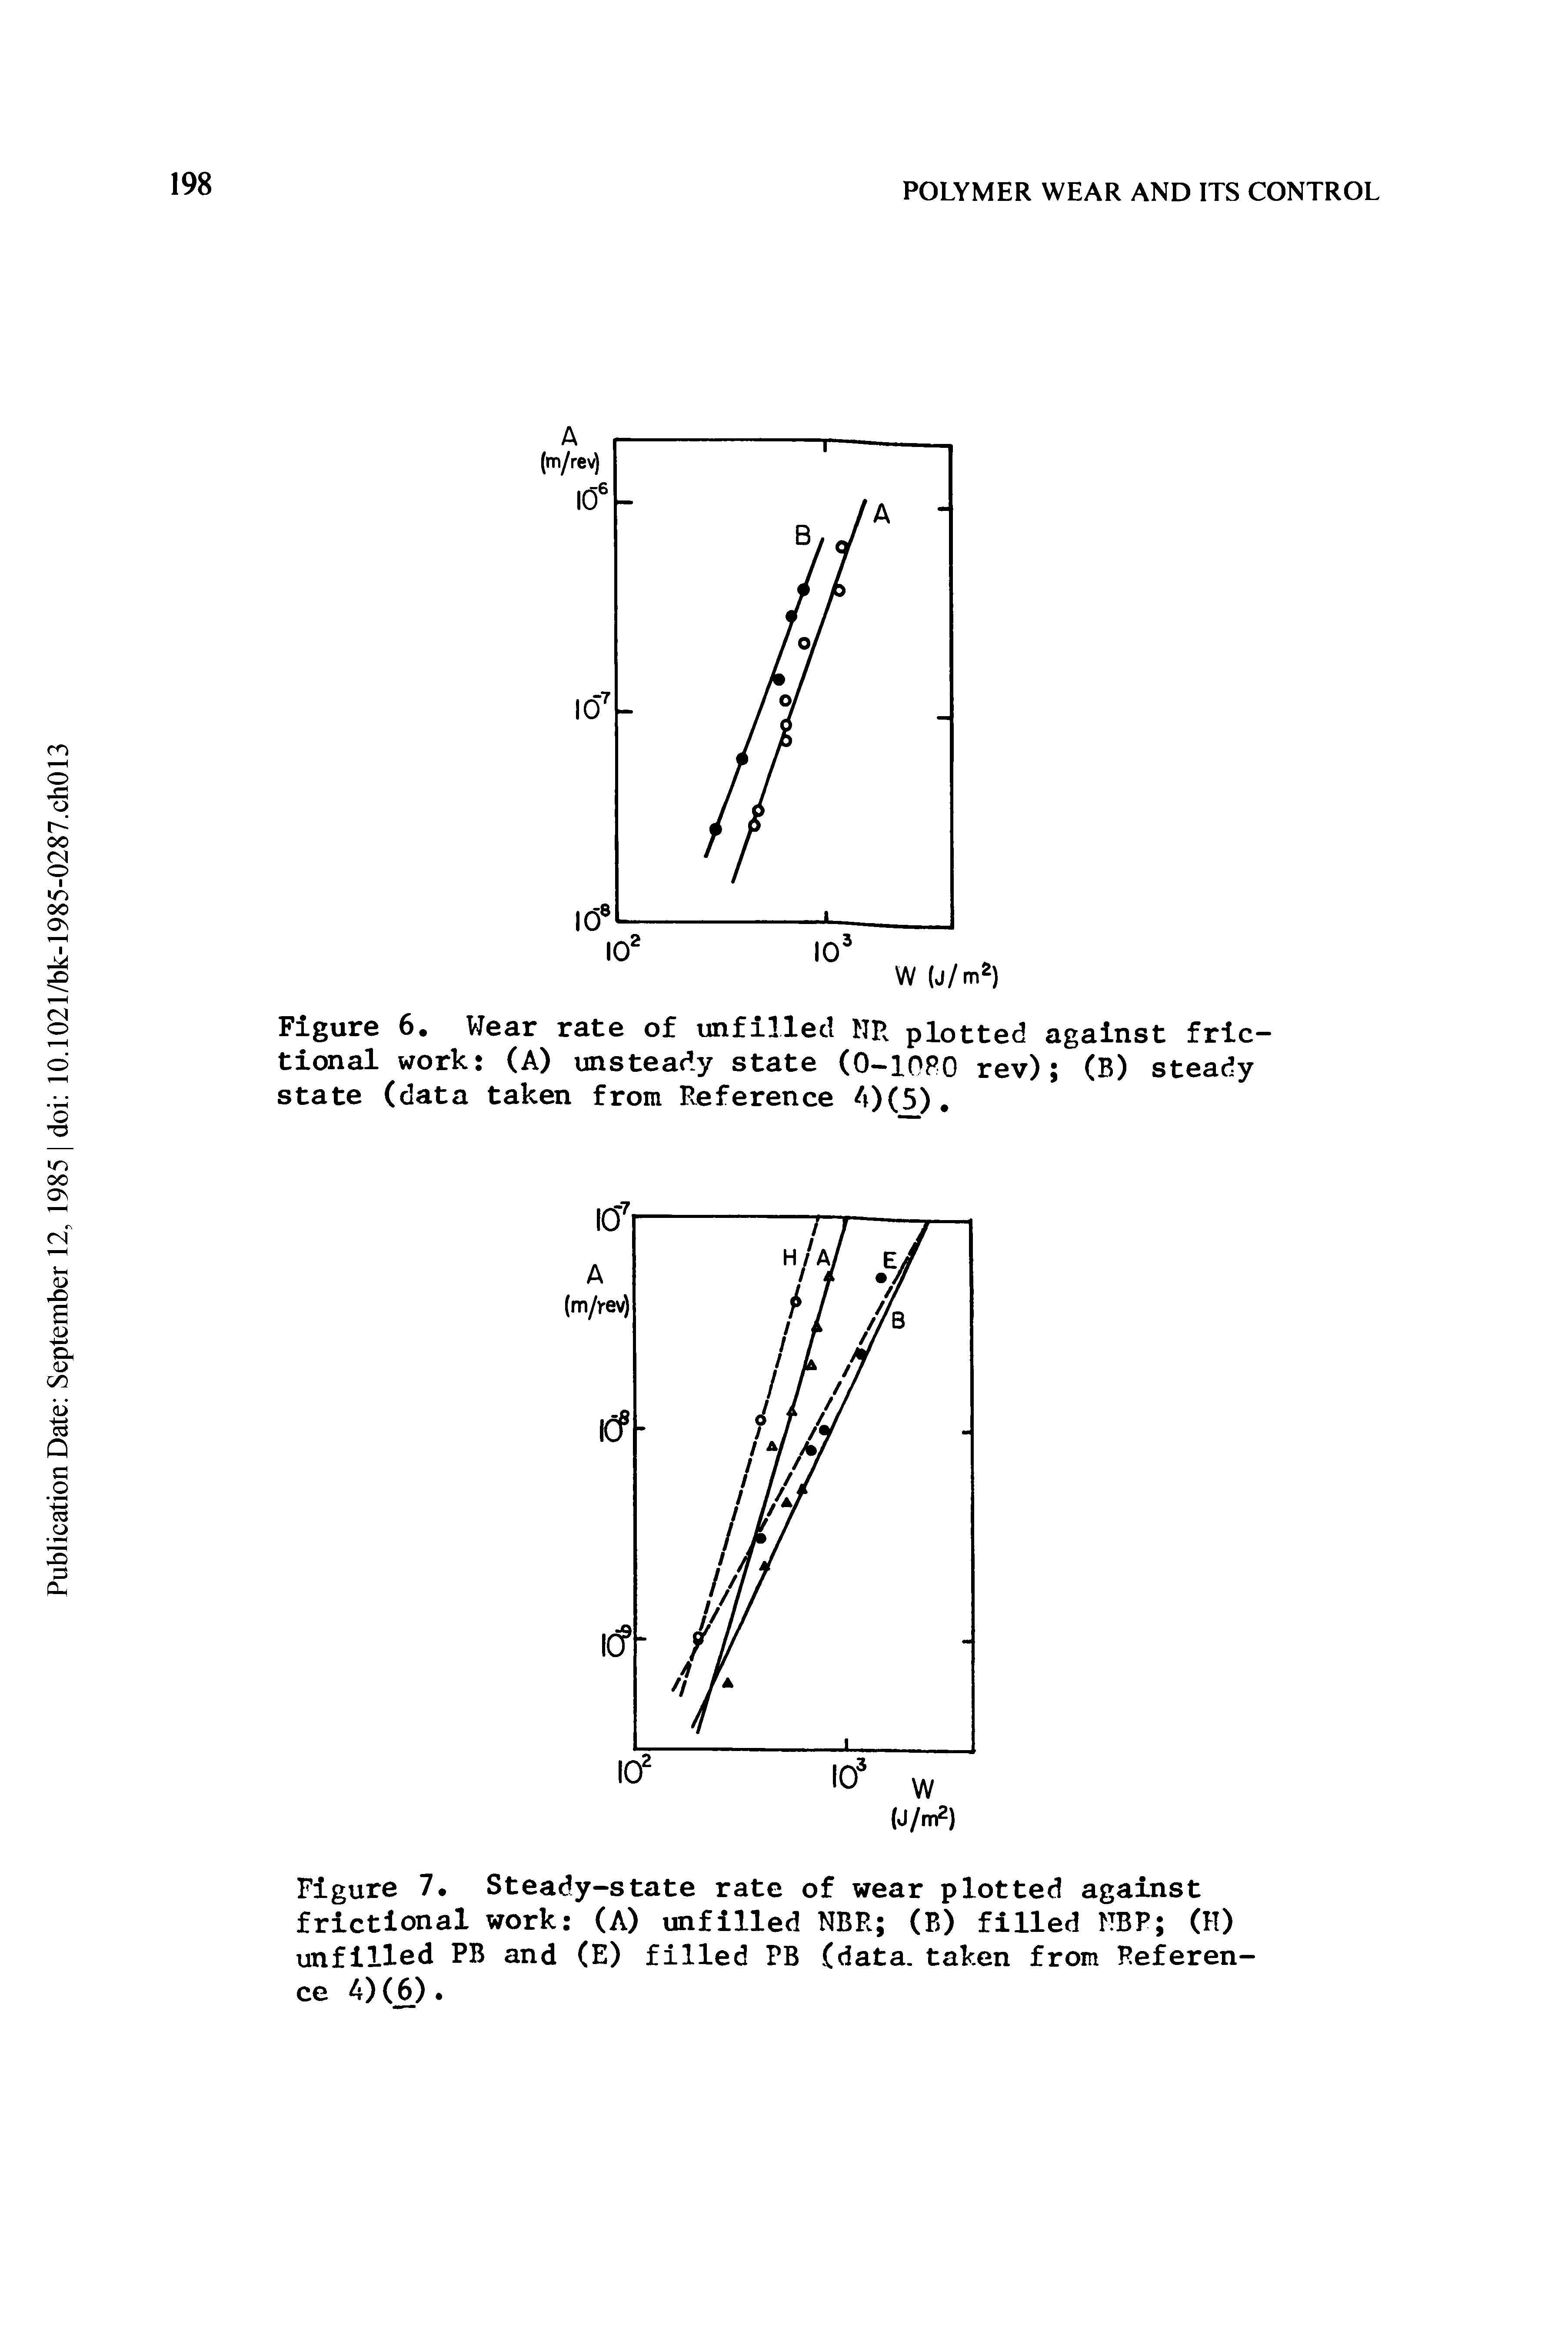 Figure 7 Steady-state rate of wear plotted against frictional work (A) unfilled NBR (B) filled NBP (H) unfilled PB and (E) filled PB (data, taken from Reference 4)(6).